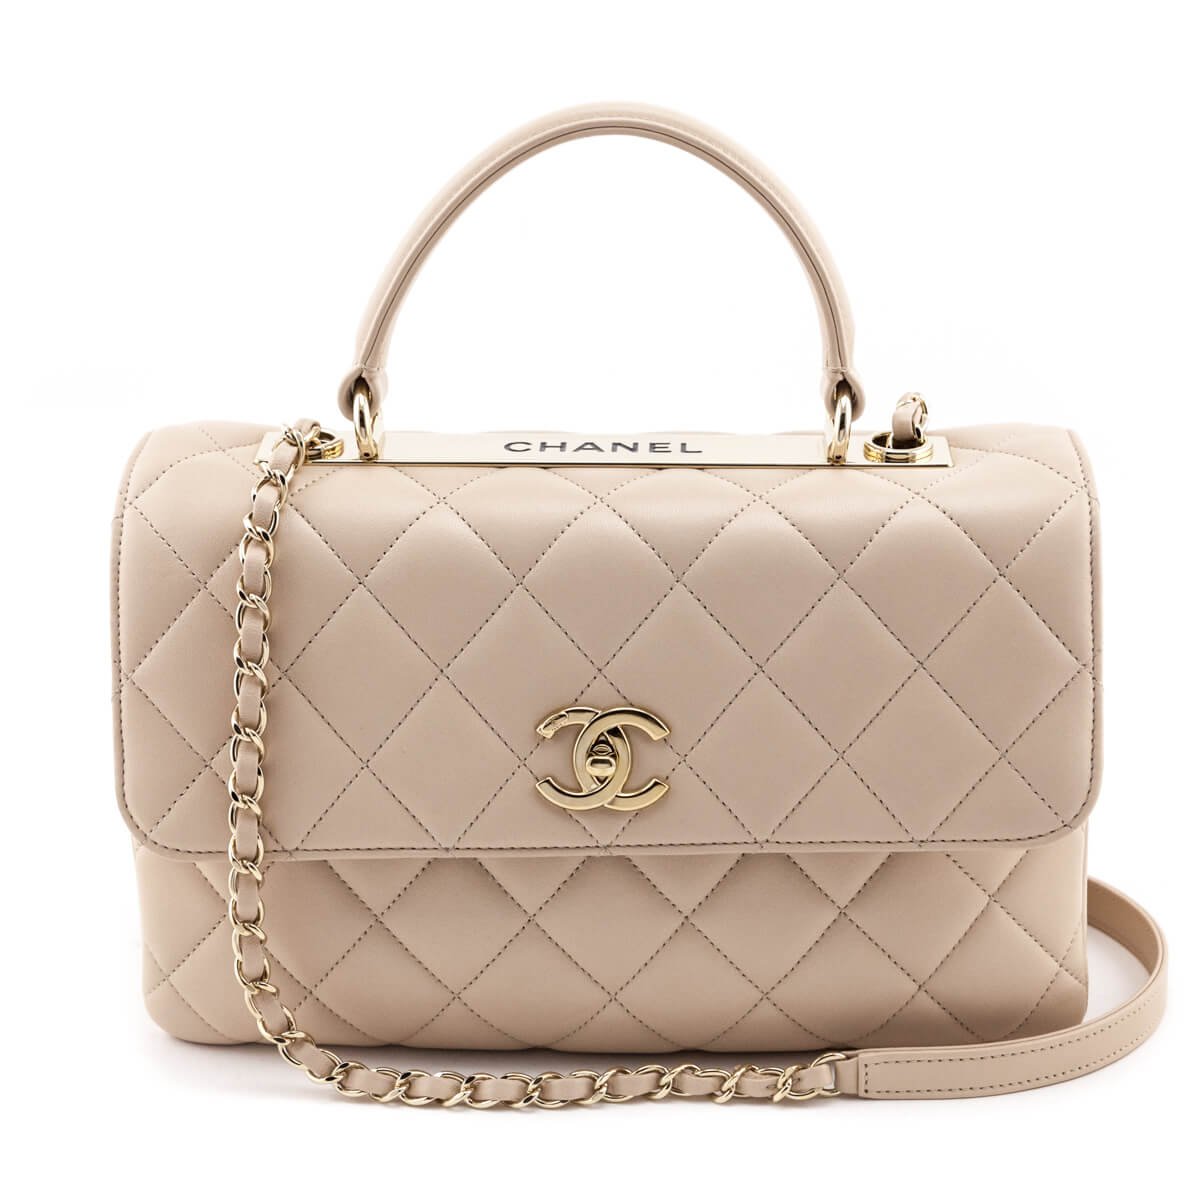 Chanel - Authenticated Trendy CC Top Handle Handbag - Leather Beige Plain for Women, Very Good Condition